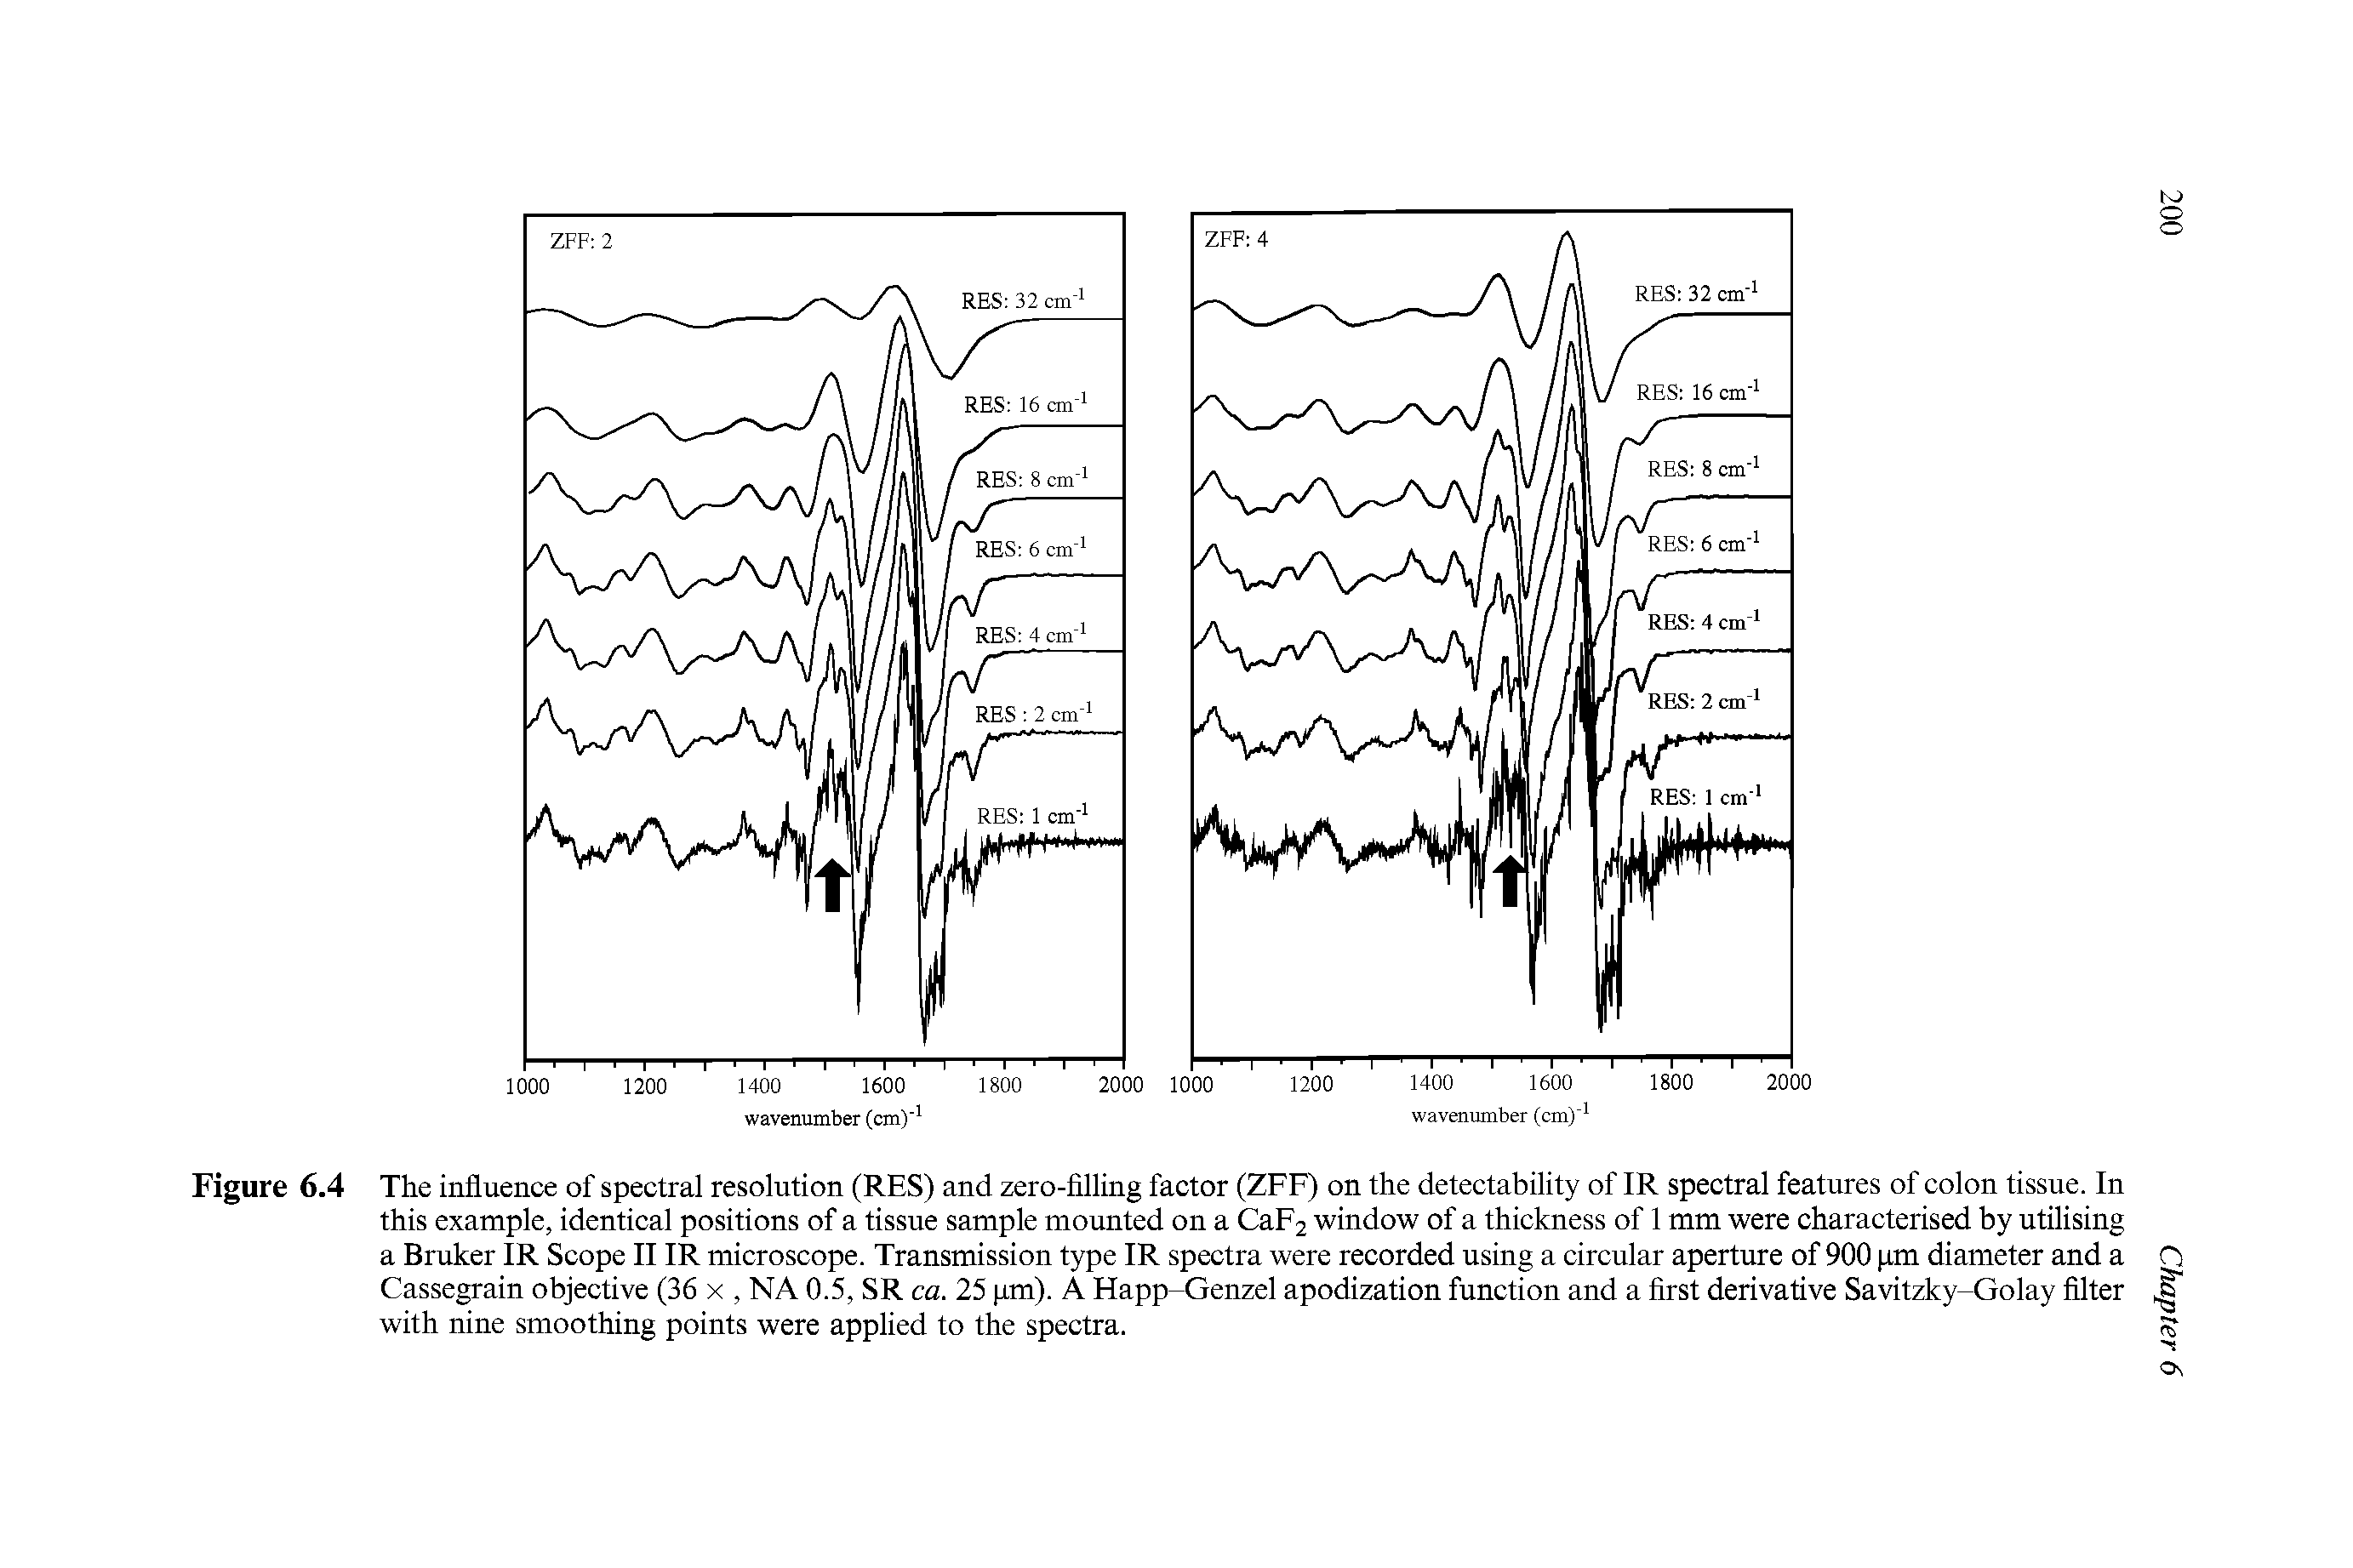 Figure 6.4 The influence of spectral resolution (RES) and zero-filling factor (ZFF) on the detectability of IR spectral features of colon tissue. In this example, identical positions of a tissue sample mounted on a CaF2 window of a thickness of 1 mm were characterised by utilising a Bruker IR Scope II IR microscope. Transmission type IR spectra were recorded using a circular aperture of 900 pm diameter and a Cassegrain objective (36 x, NA 0.5, SR ca. 25 pm). A Happ-Genzel apodization function and a first derivative Savitzky-Golay filter with nine smoothing points were applied to the spectra.